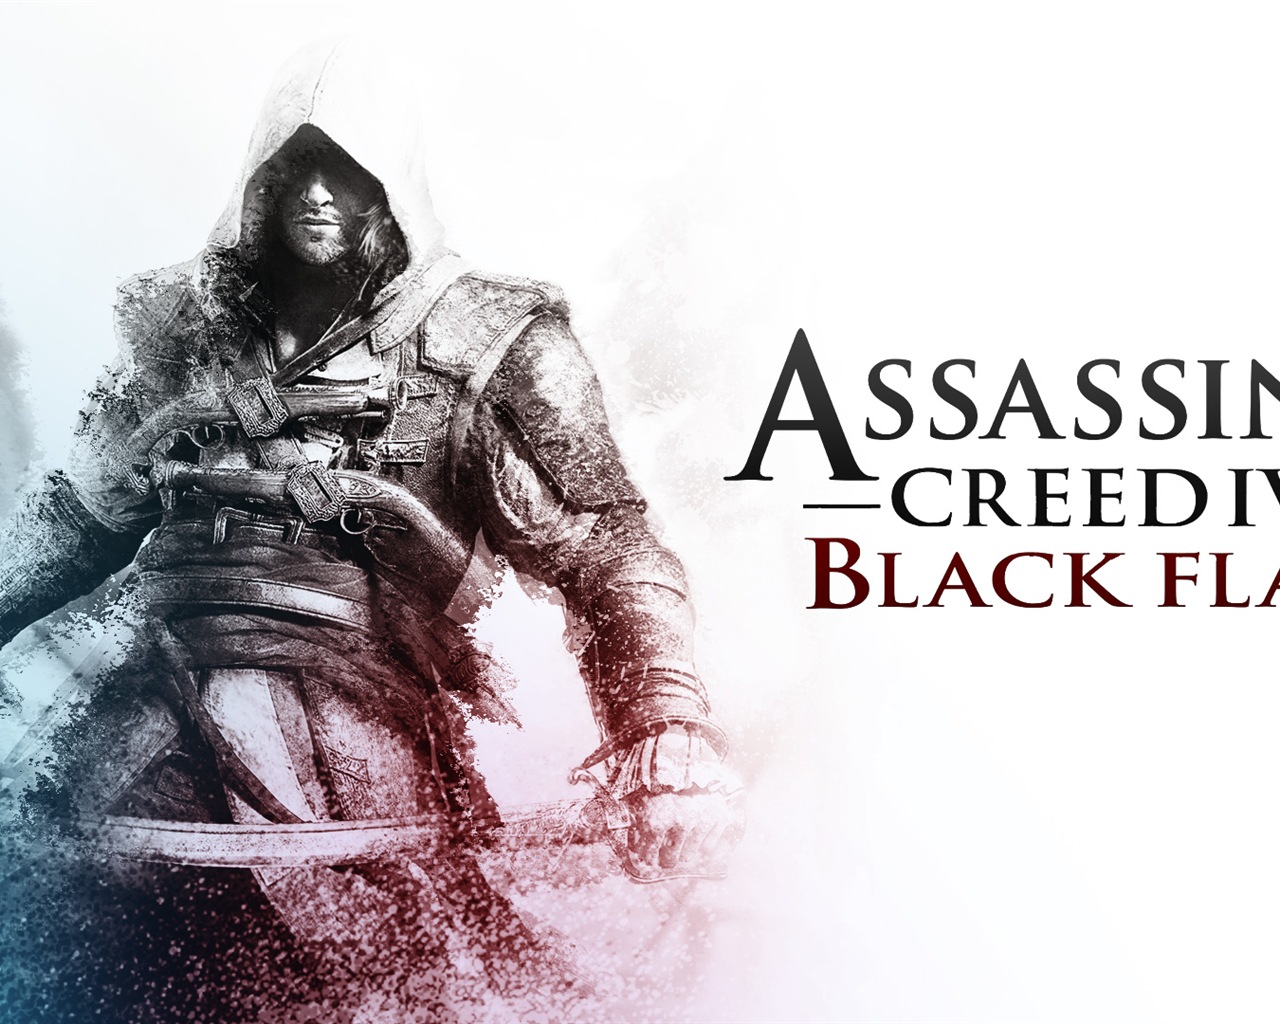 Creed IV Assassin: Black Flag HD wallpapers #16 - 1280x1024